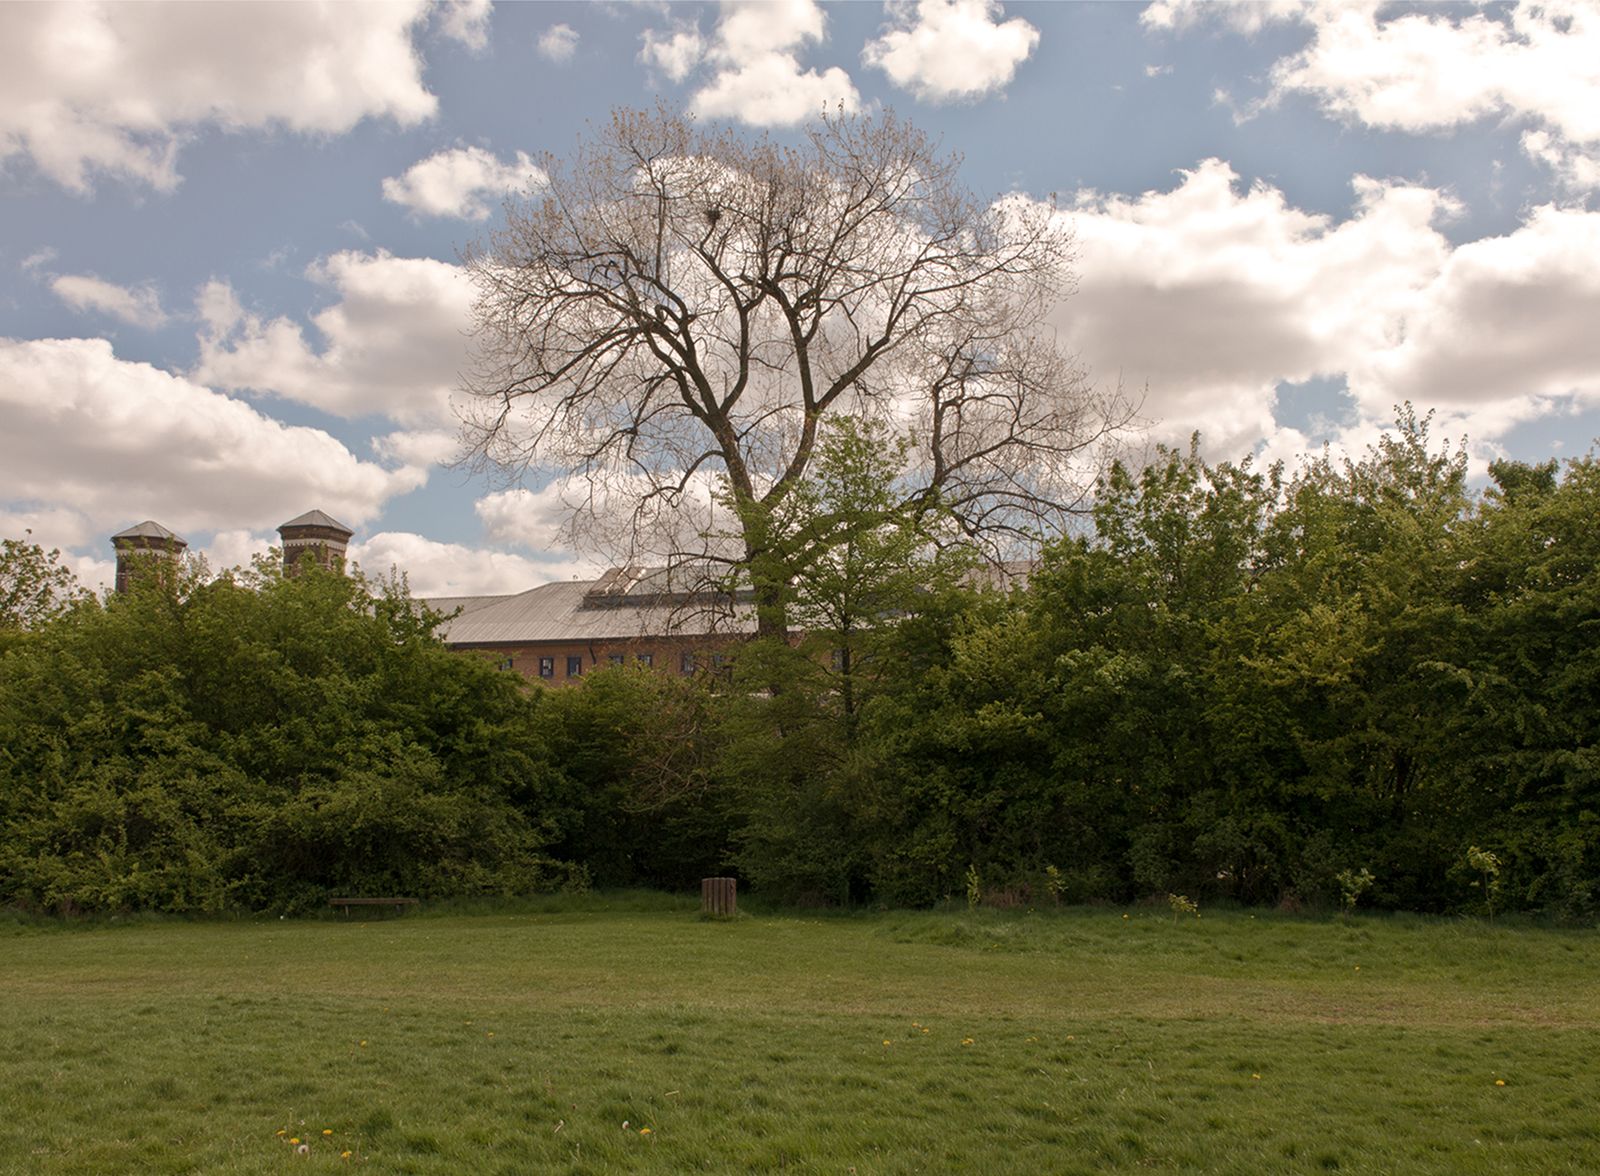 © Roxana and Pablo Allison - Picture of tree outside prison taken by Roxana, Wormwood Scrubs, 2013